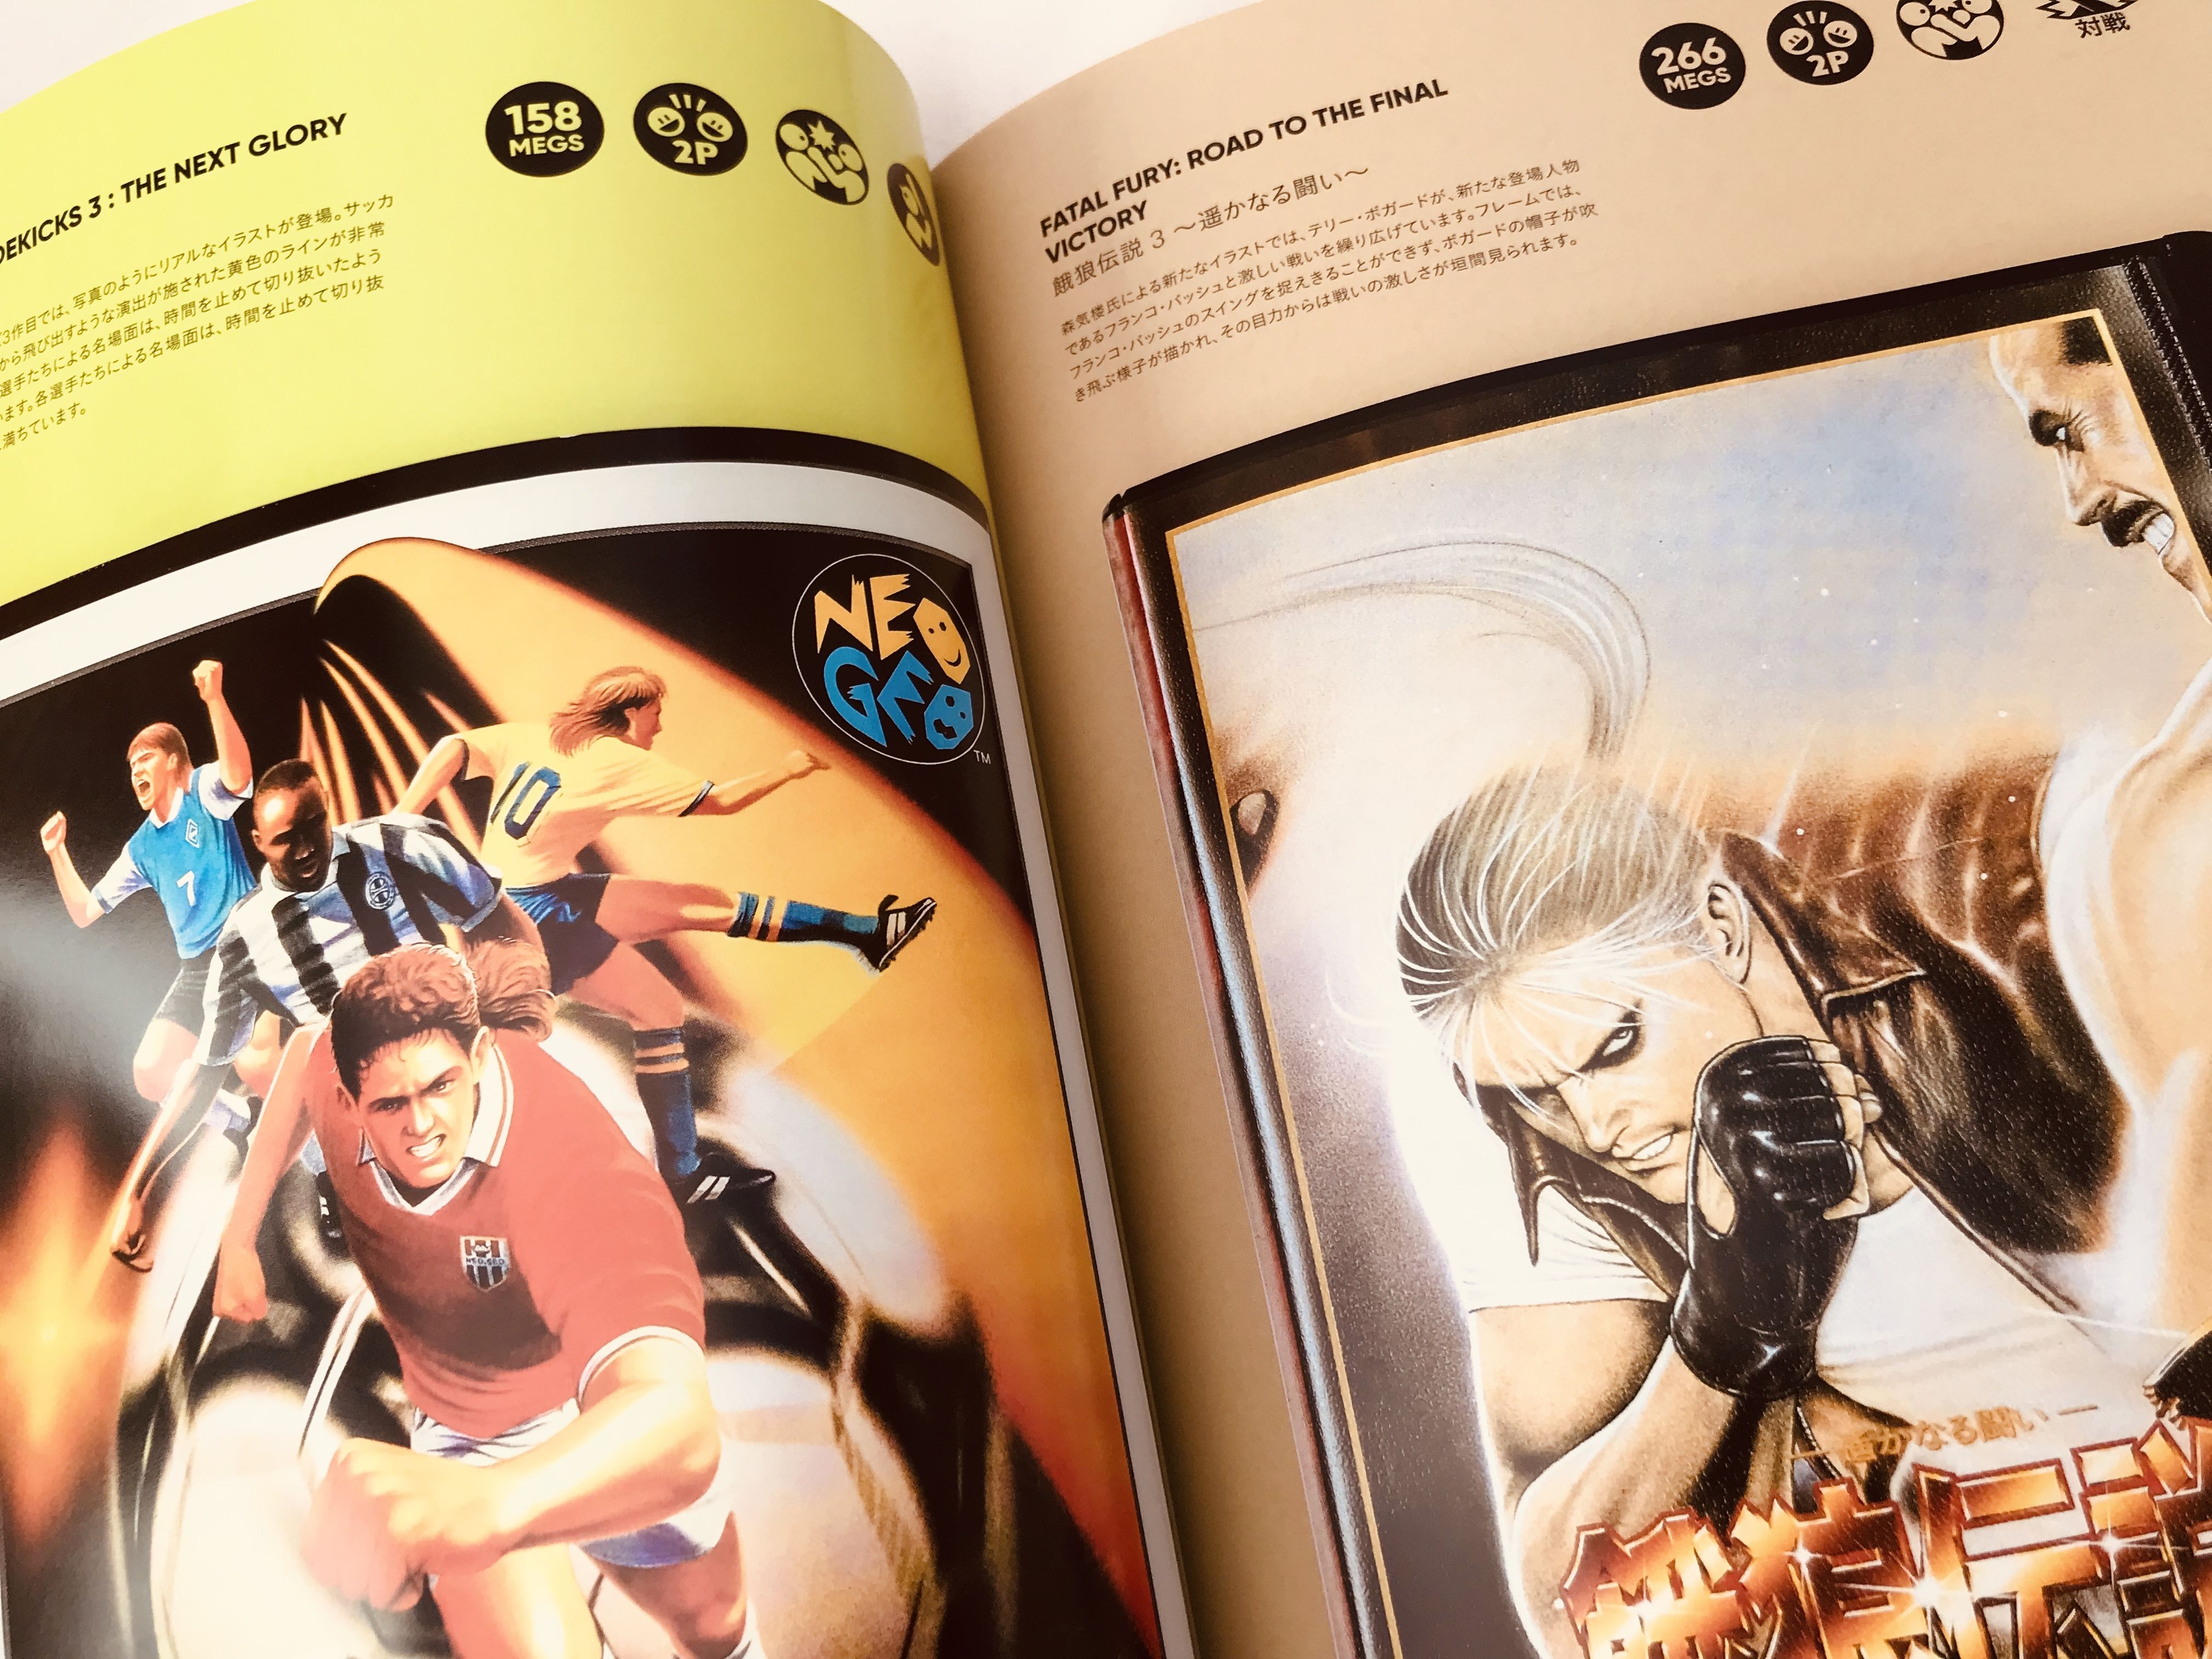 Bitmap Books Neogeo A Visual History Has Been Translated To Japanese How Cool Thanks To Snkpofficial For Making It Happen Neogeo Snk T Co Iyl9w4sfsk Twitter